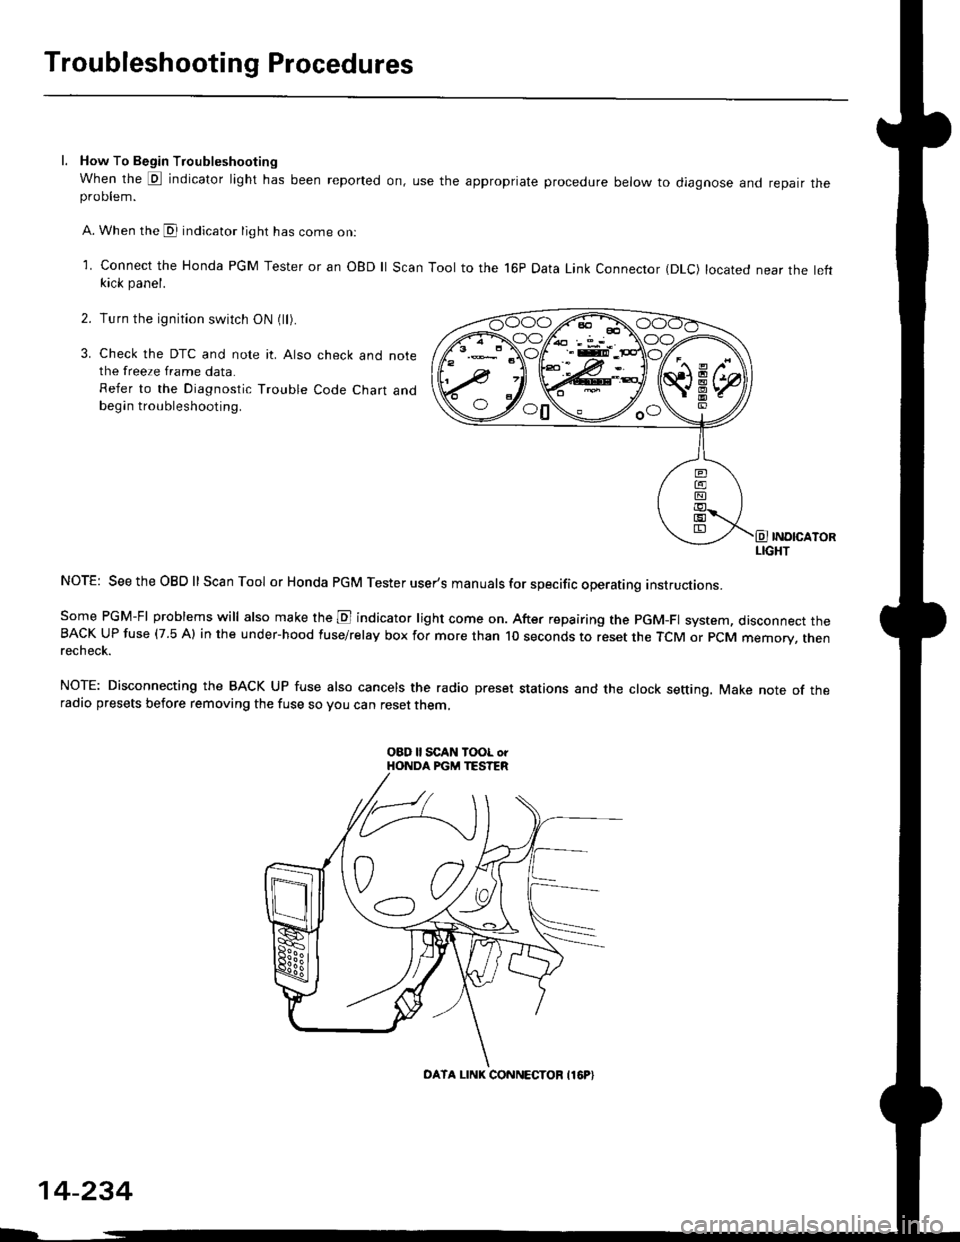 HONDA CIVIC 1996 6.G Owners Guide Troubleshooting Procedures
l. How To Begin Troubleshooting
When the E indicator light has been reported on, use the appropriate procedure below to diagnose and repatr theproDlem.
A. When the @ indicat